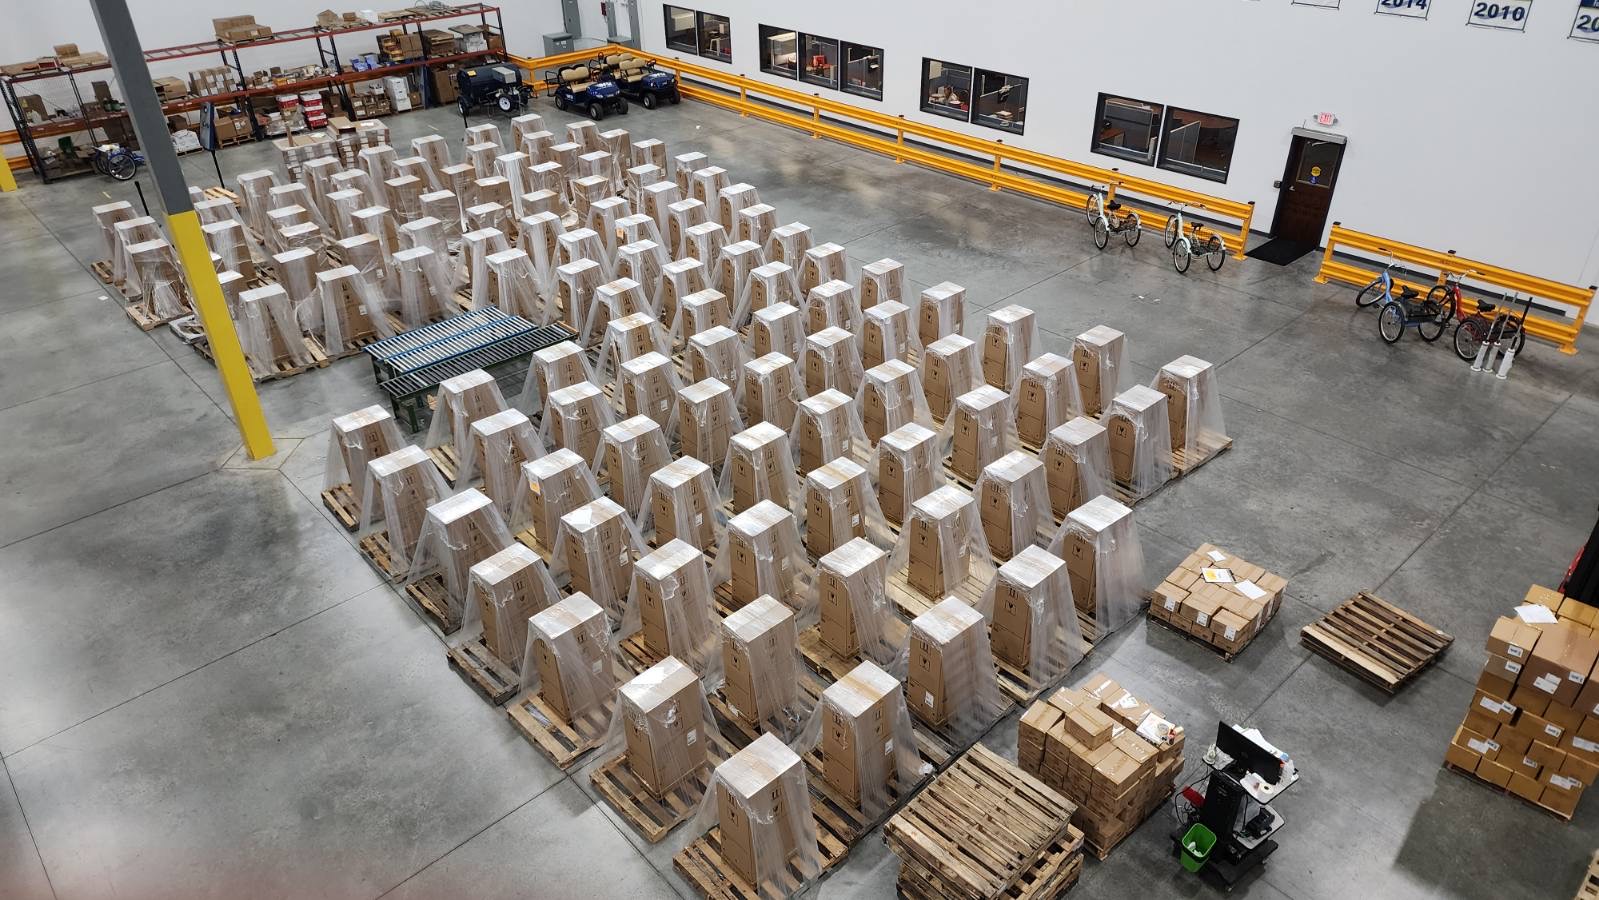 A warehouse with numerous stacked pallets containing boxed items, orderly arranged in rows. Several bicycles are parked along a wall, reflecting the bustling logistics environment, with shelves holding various items nearby for easy picking.